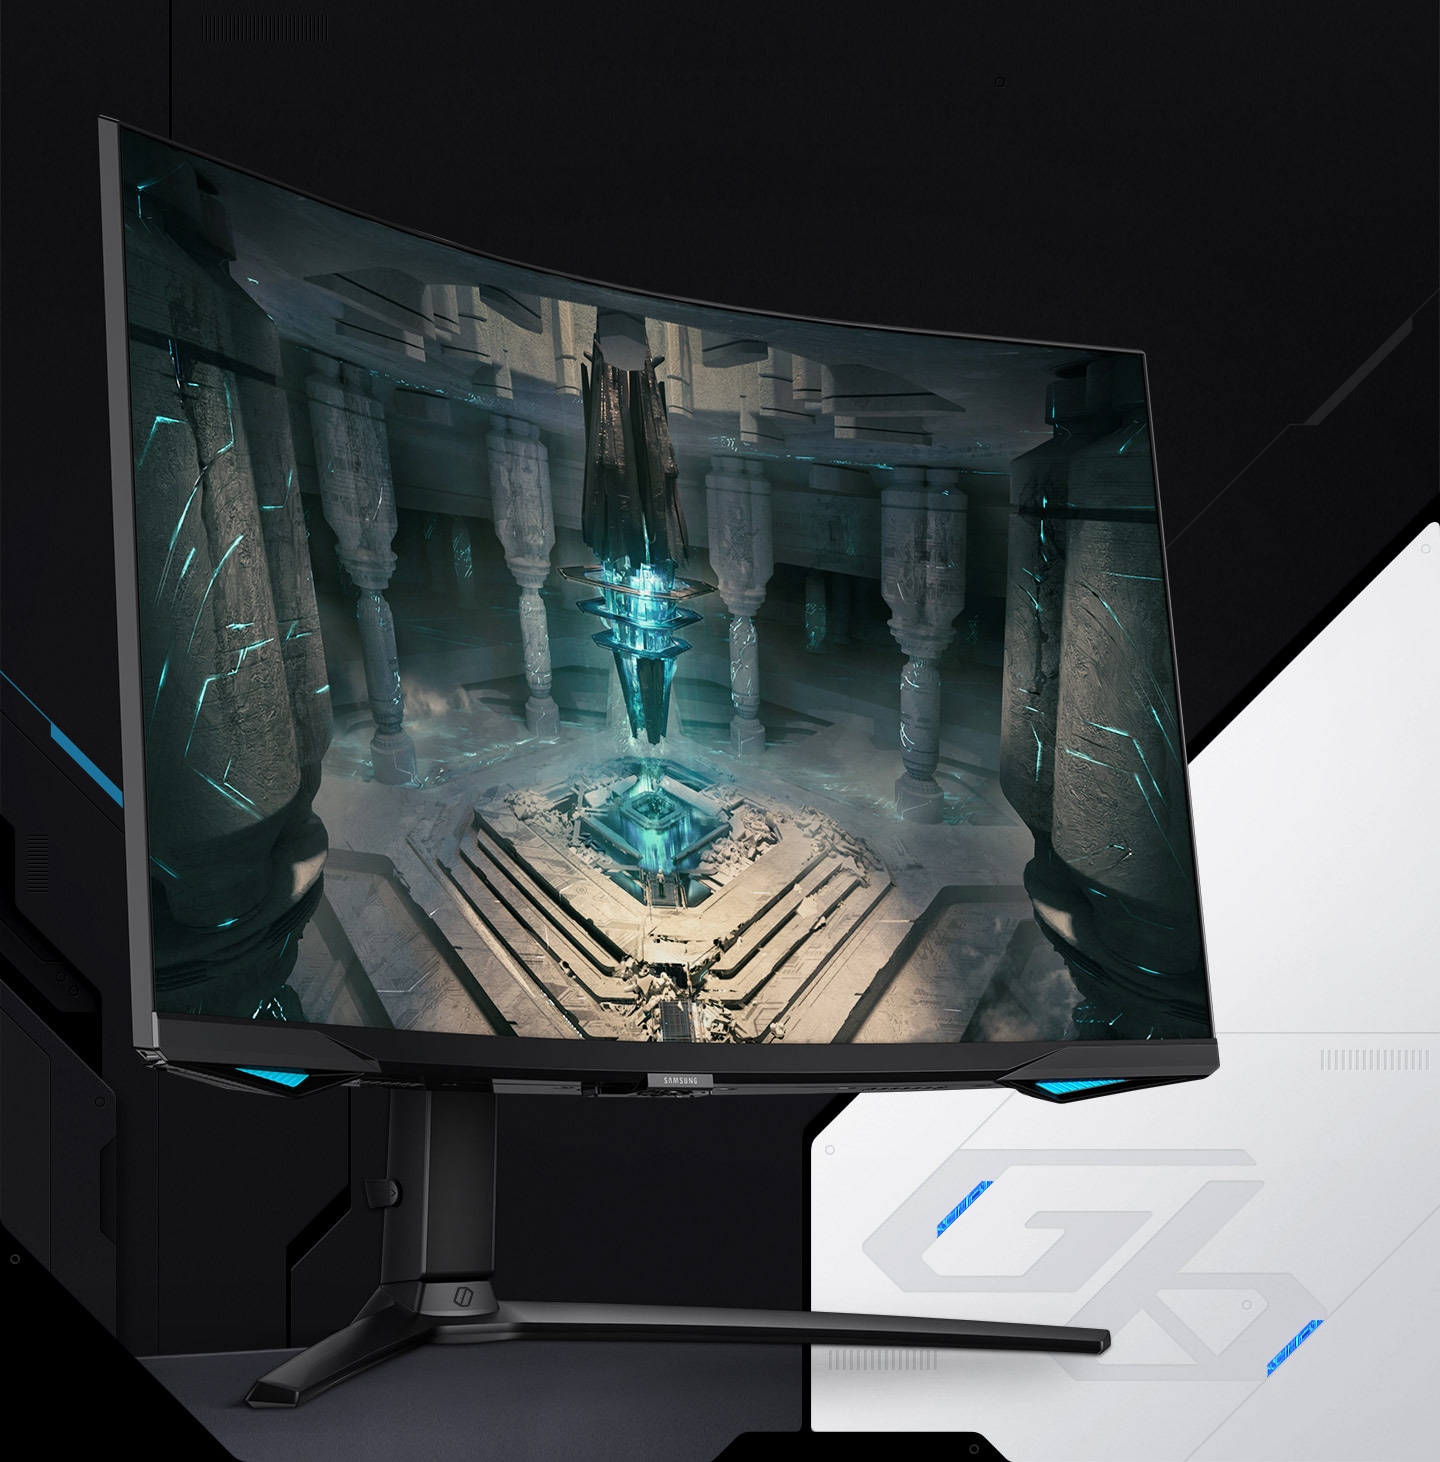 On the monitor display is a skyblue rocket ship with light emitting from its engine exhausts inside an underground cave. The rocket ship is set to launch out of the opening above, and surrounded by stone pillars and steps. \G6\ logo is placed on the right side of the monitor stand.